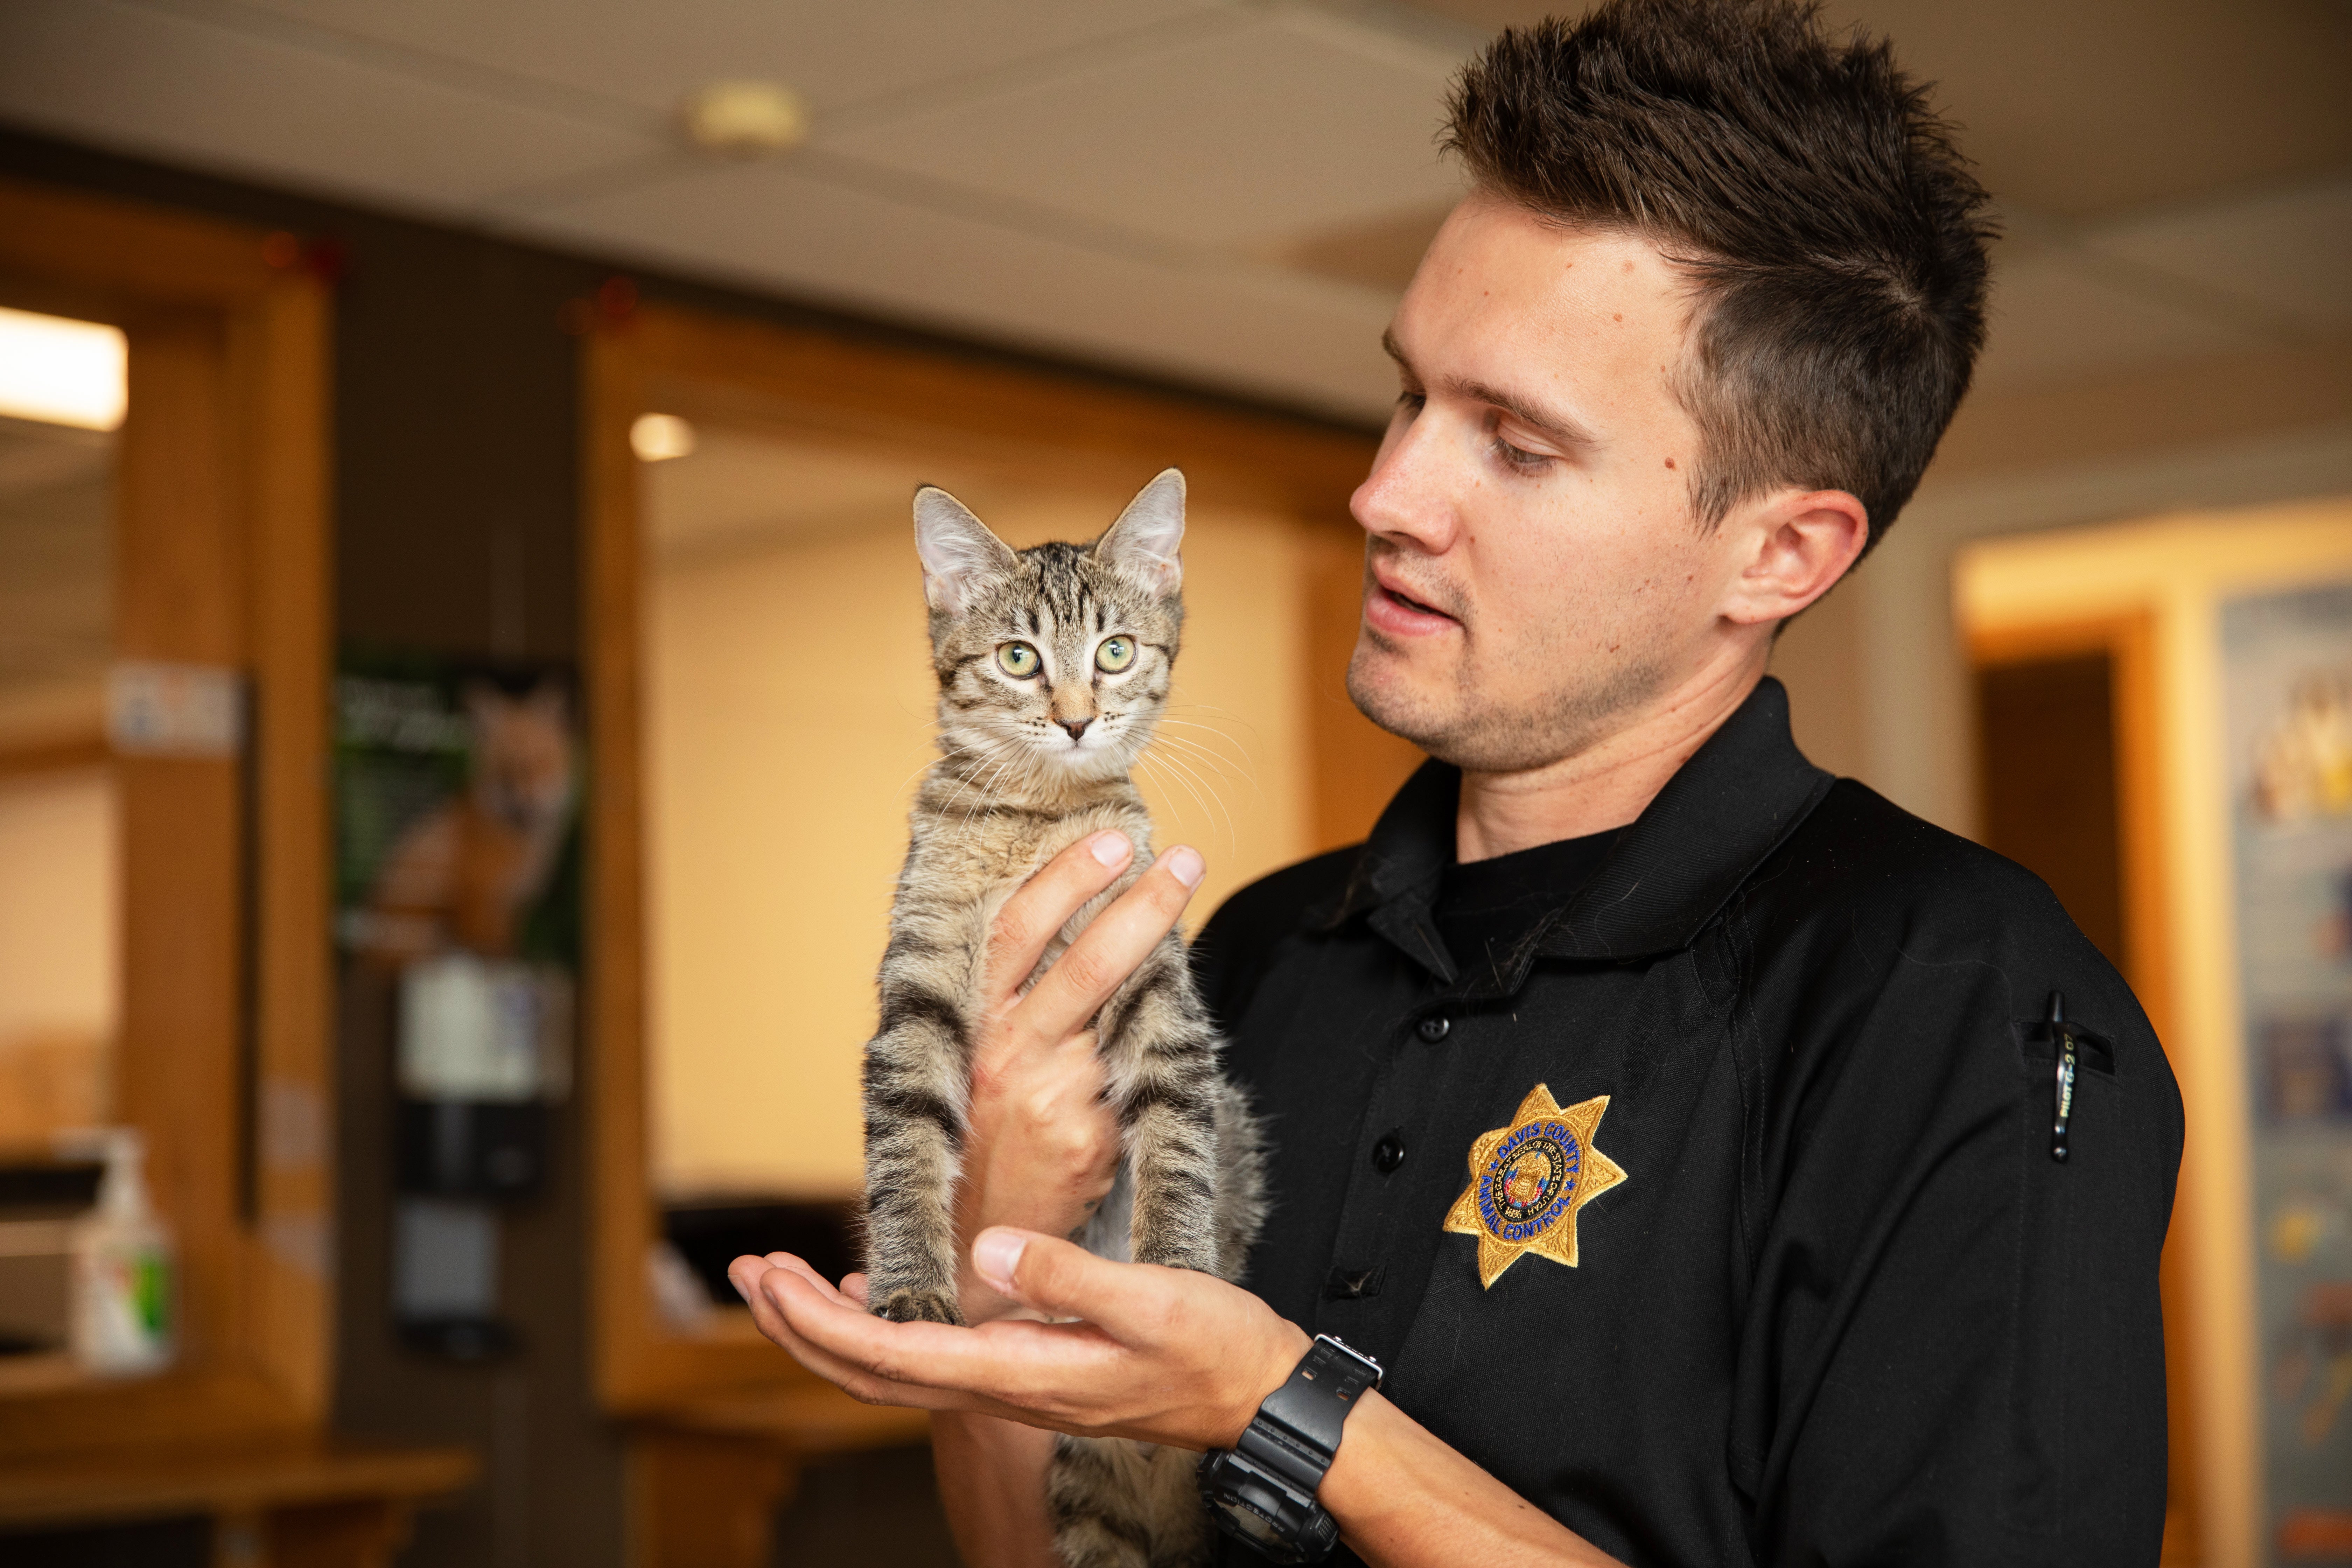 Animal Control Officer holding a tabby kitten in his hands